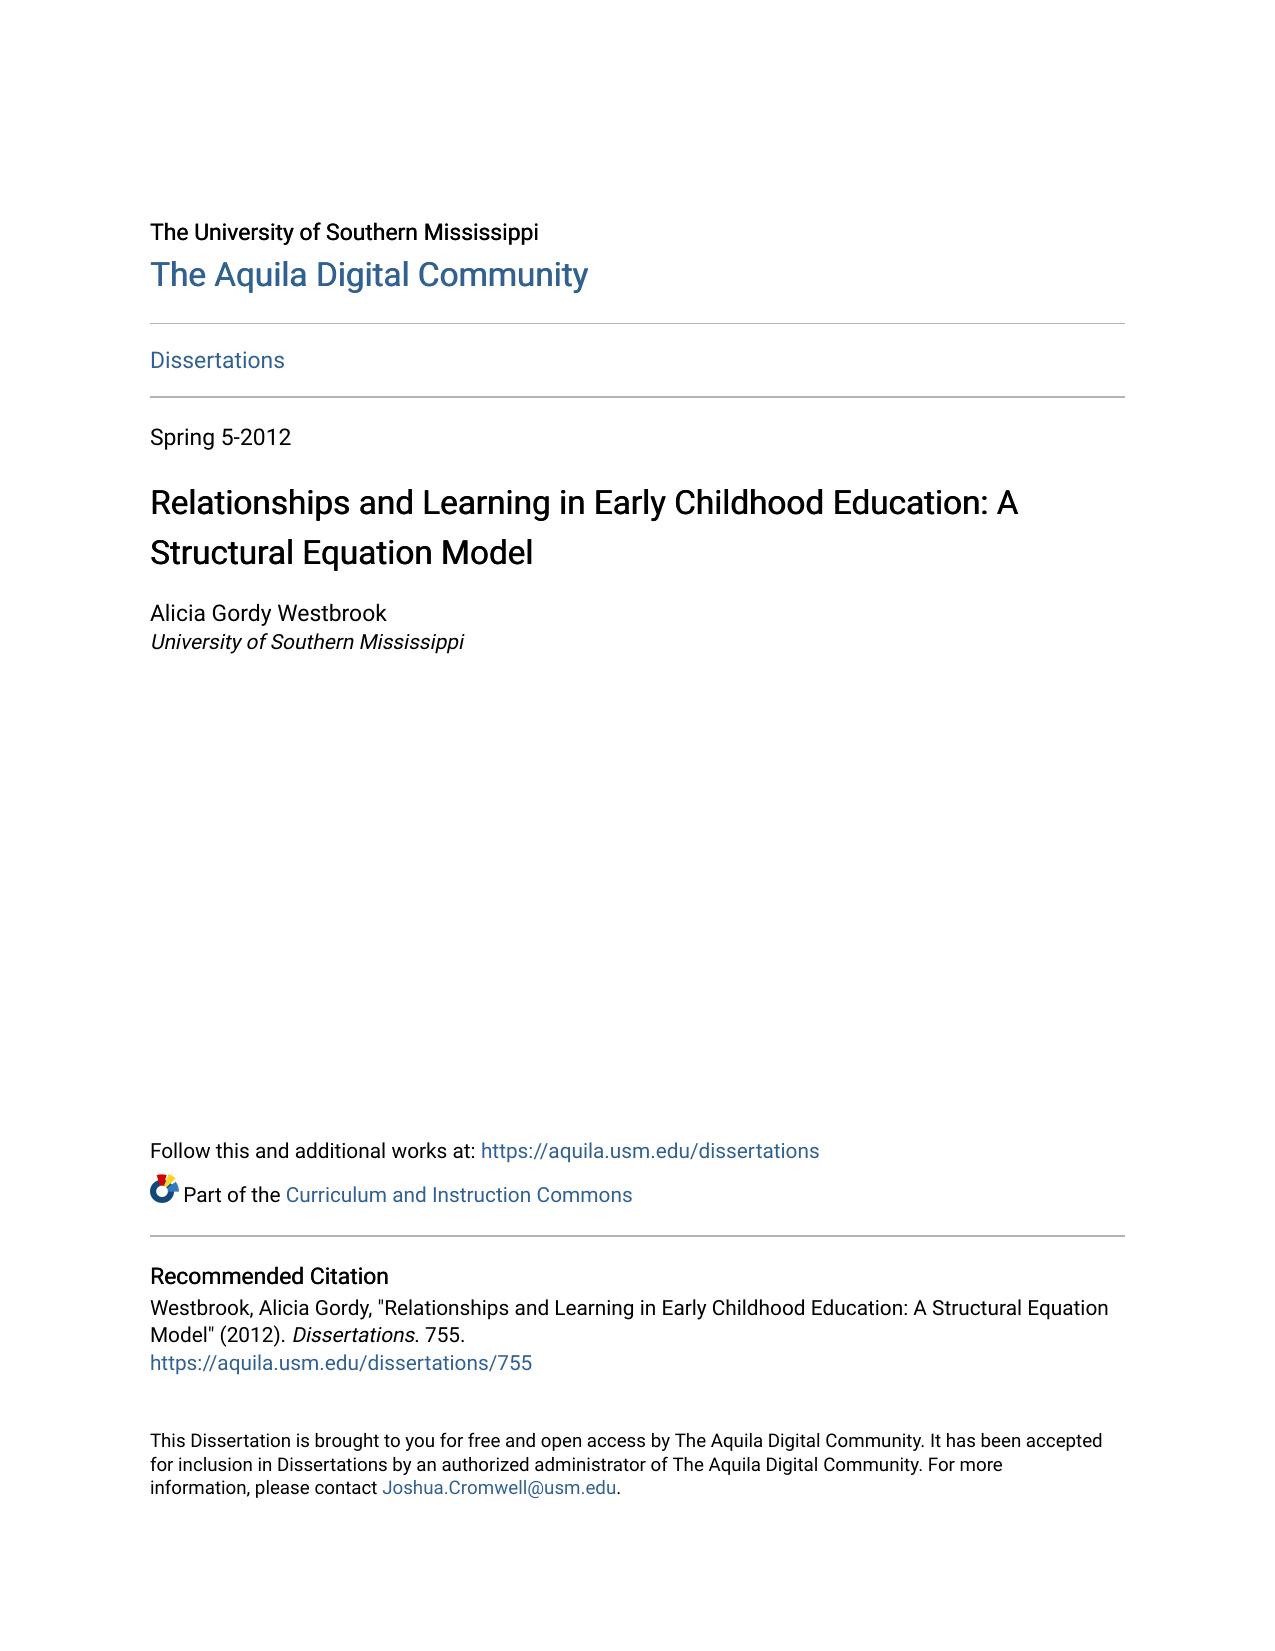 Relationships and Learning in Early Childhood Education: A Structural Equation Model